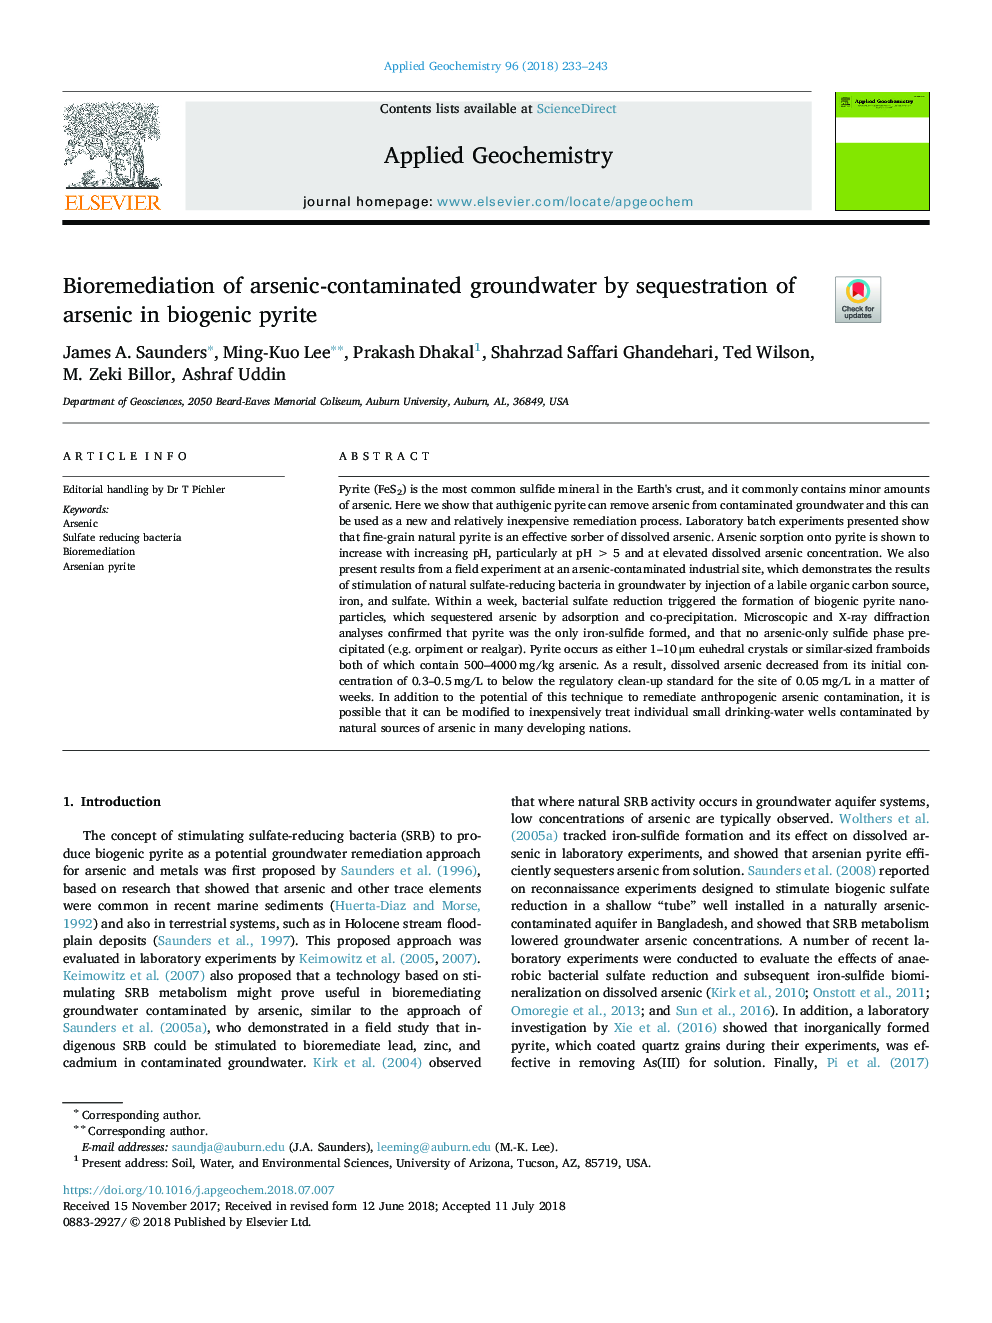 Bioremediation of arsenic-contaminated groundwater by sequestration of arsenic in biogenic pyrite